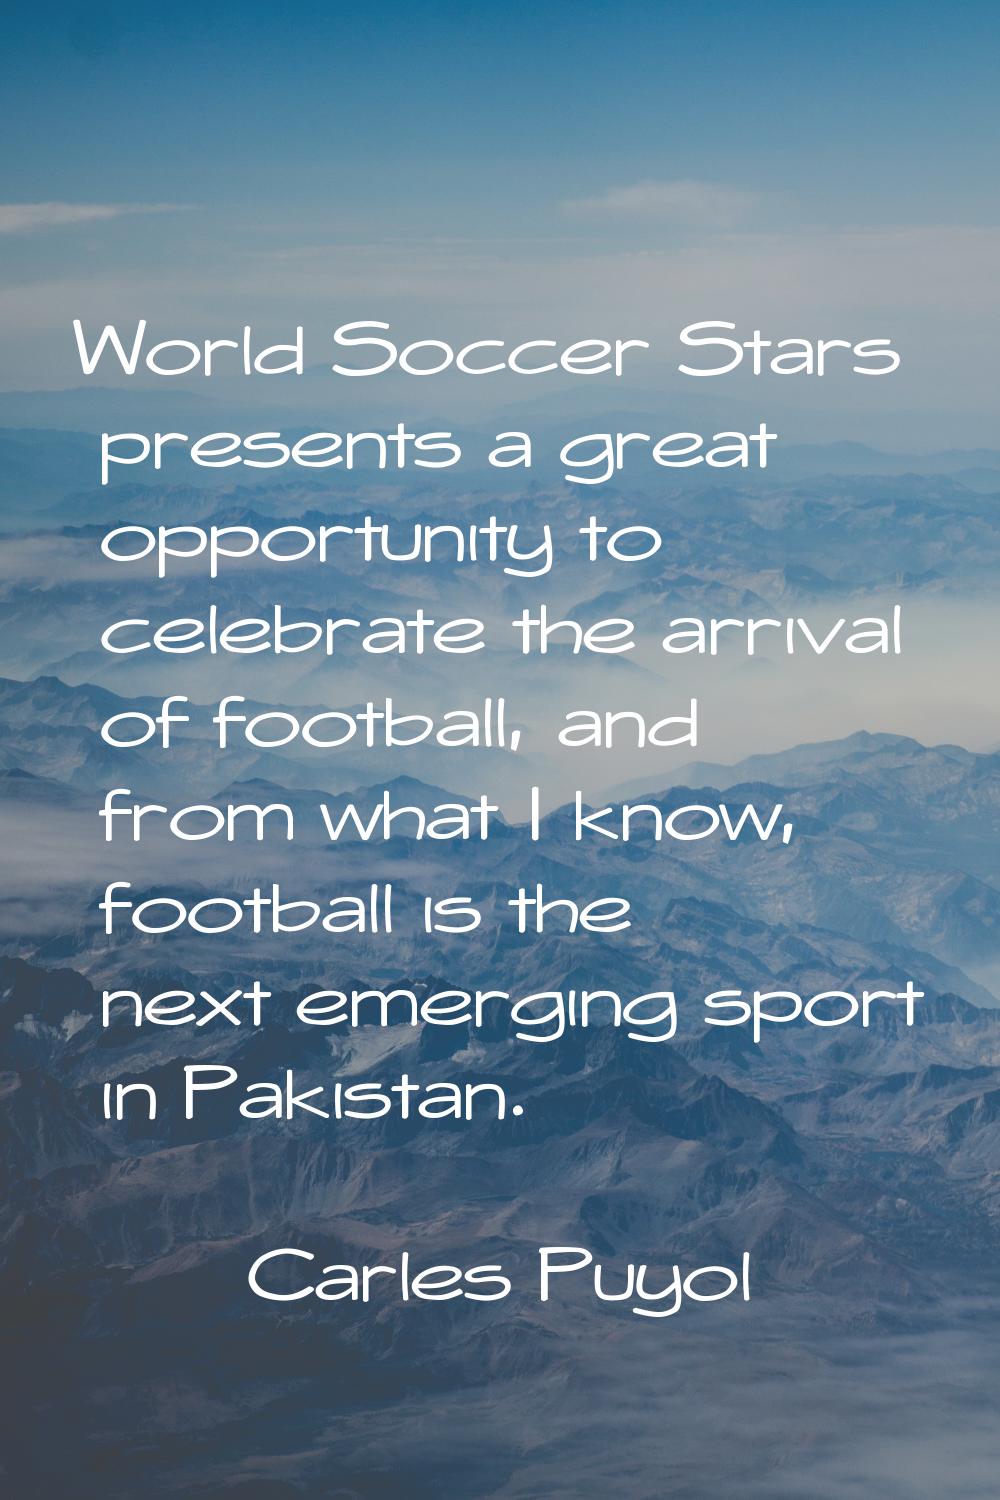 World Soccer Stars presents a great opportunity to celebrate the arrival of football, and from what